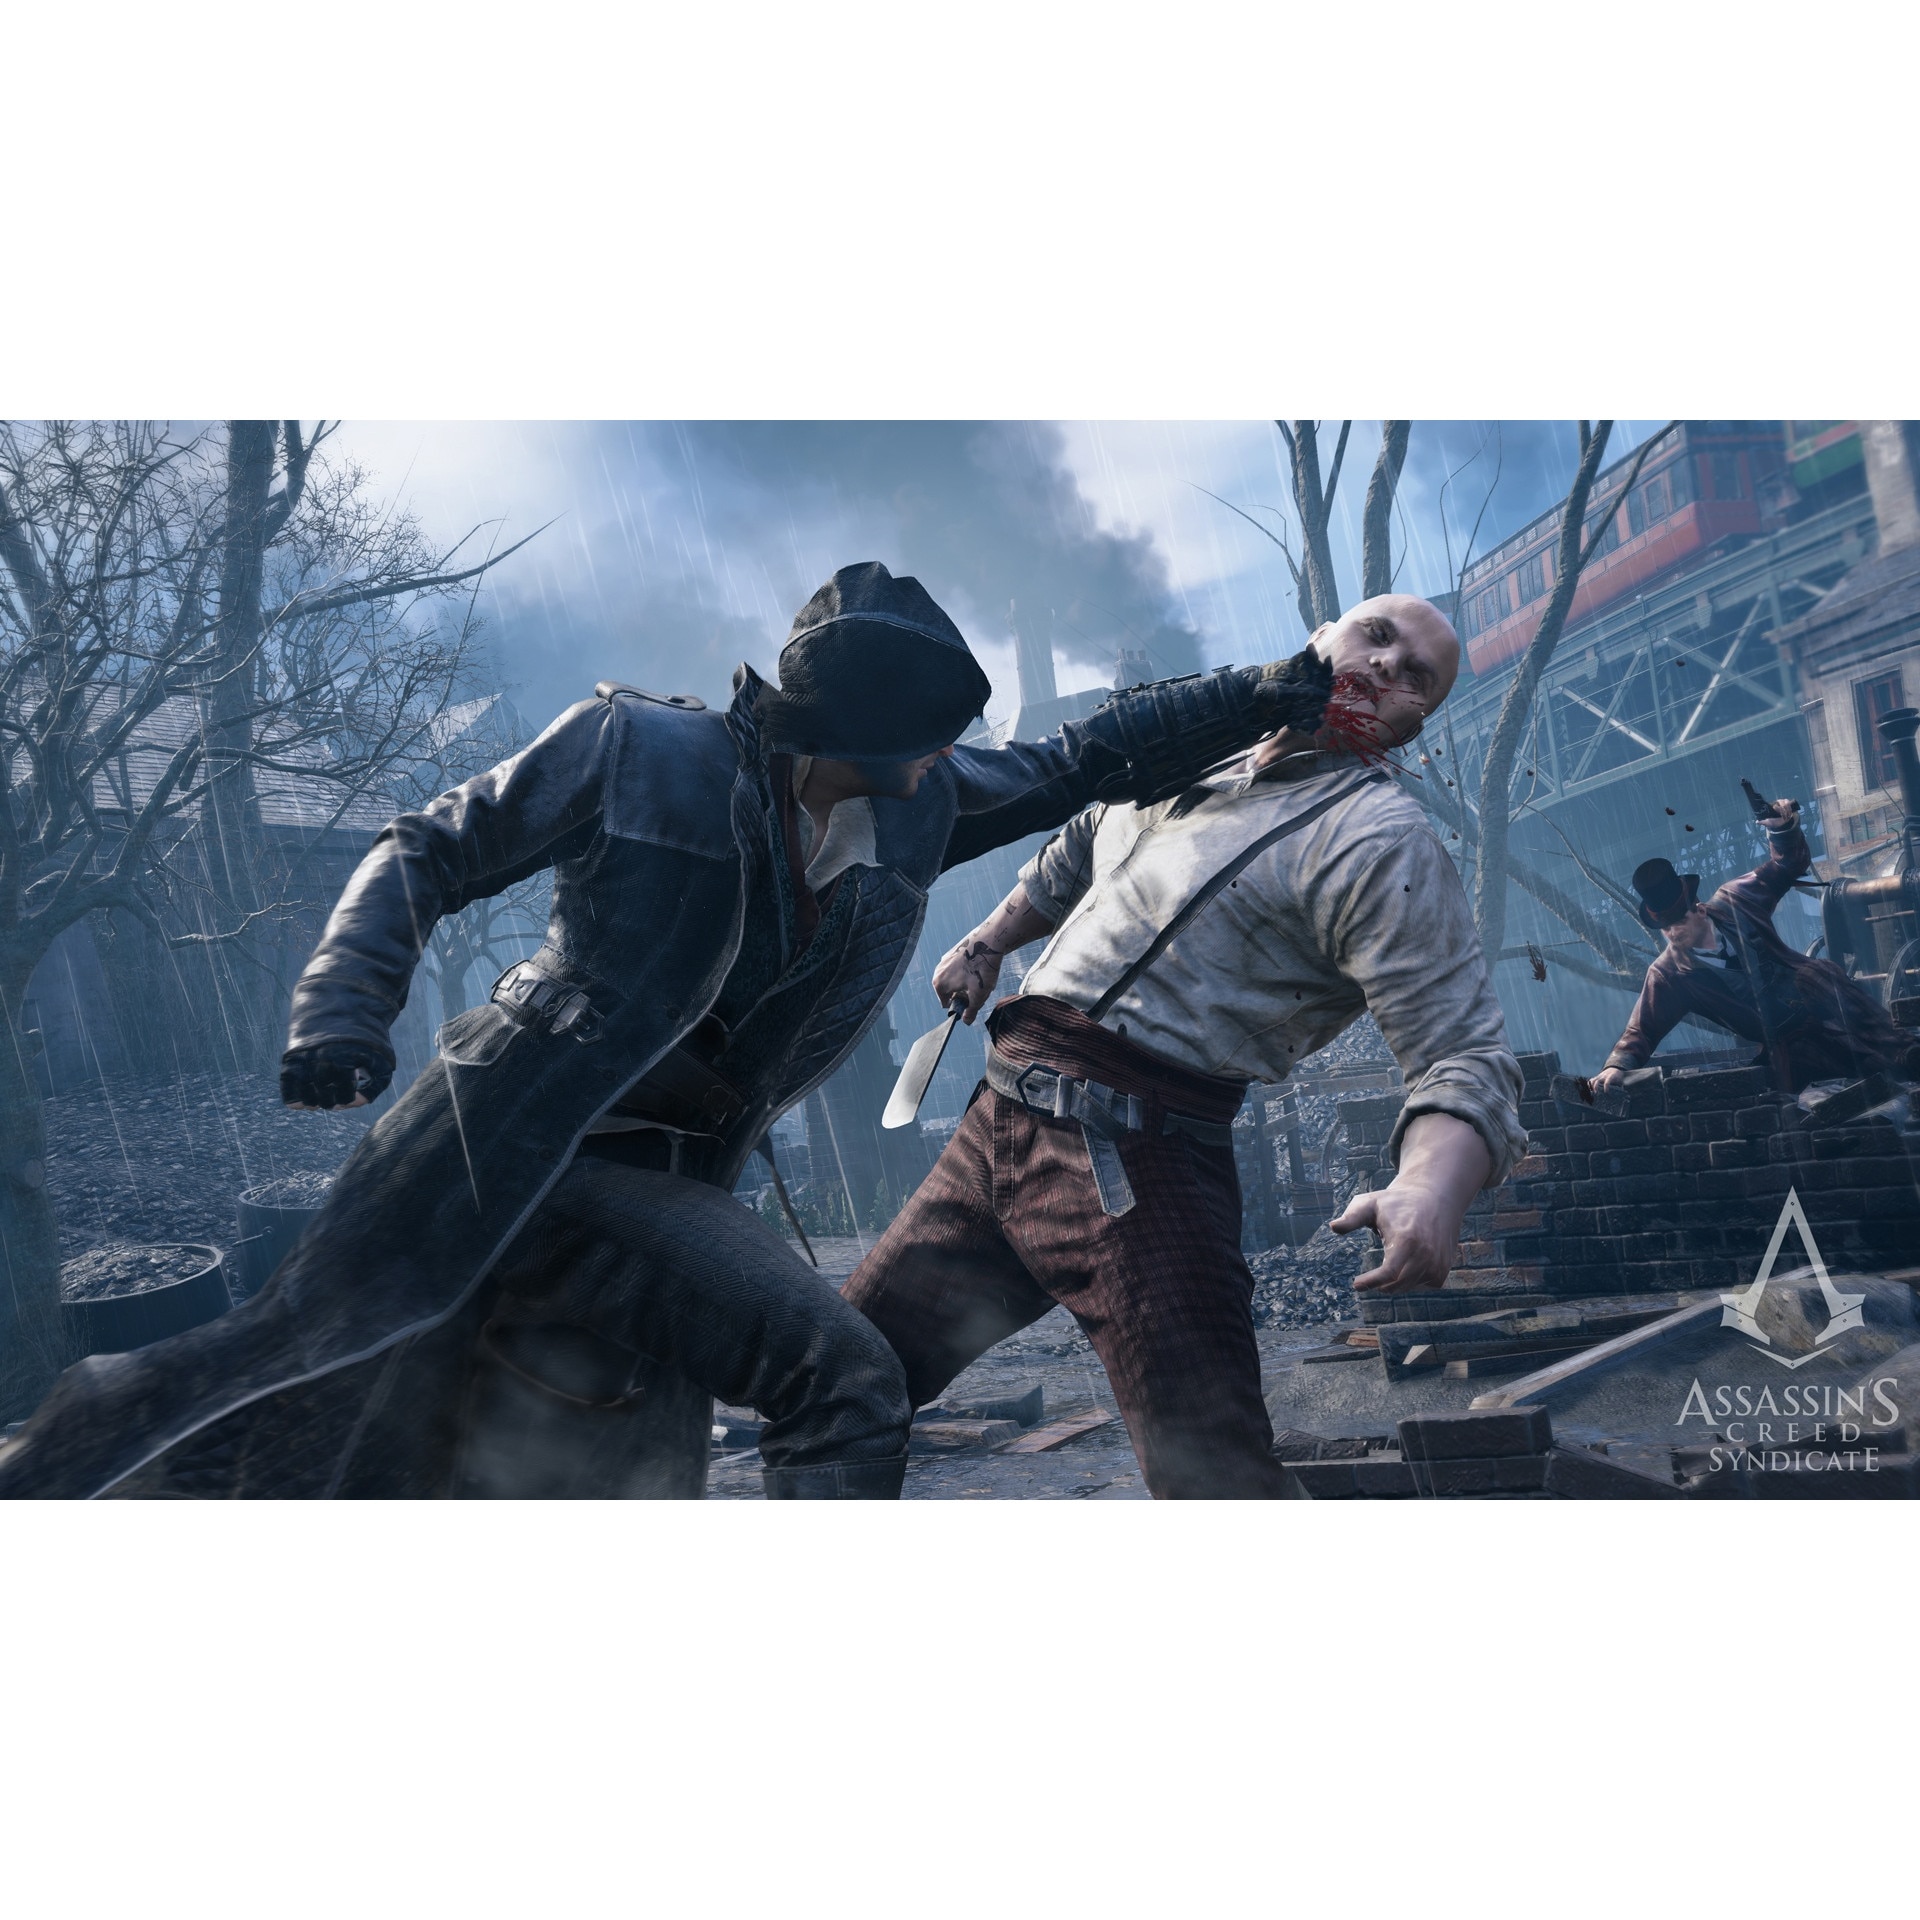 Assassins игра xbox. Assassin's Creed Синдикат ps4. Ассасин Синдикат на Xbox one. Игра для ps4 Ubisoft Assassin's Creed: Синдикат. Специальное издание. Assassin's Creed Syndicate Xbox one Special Edition.